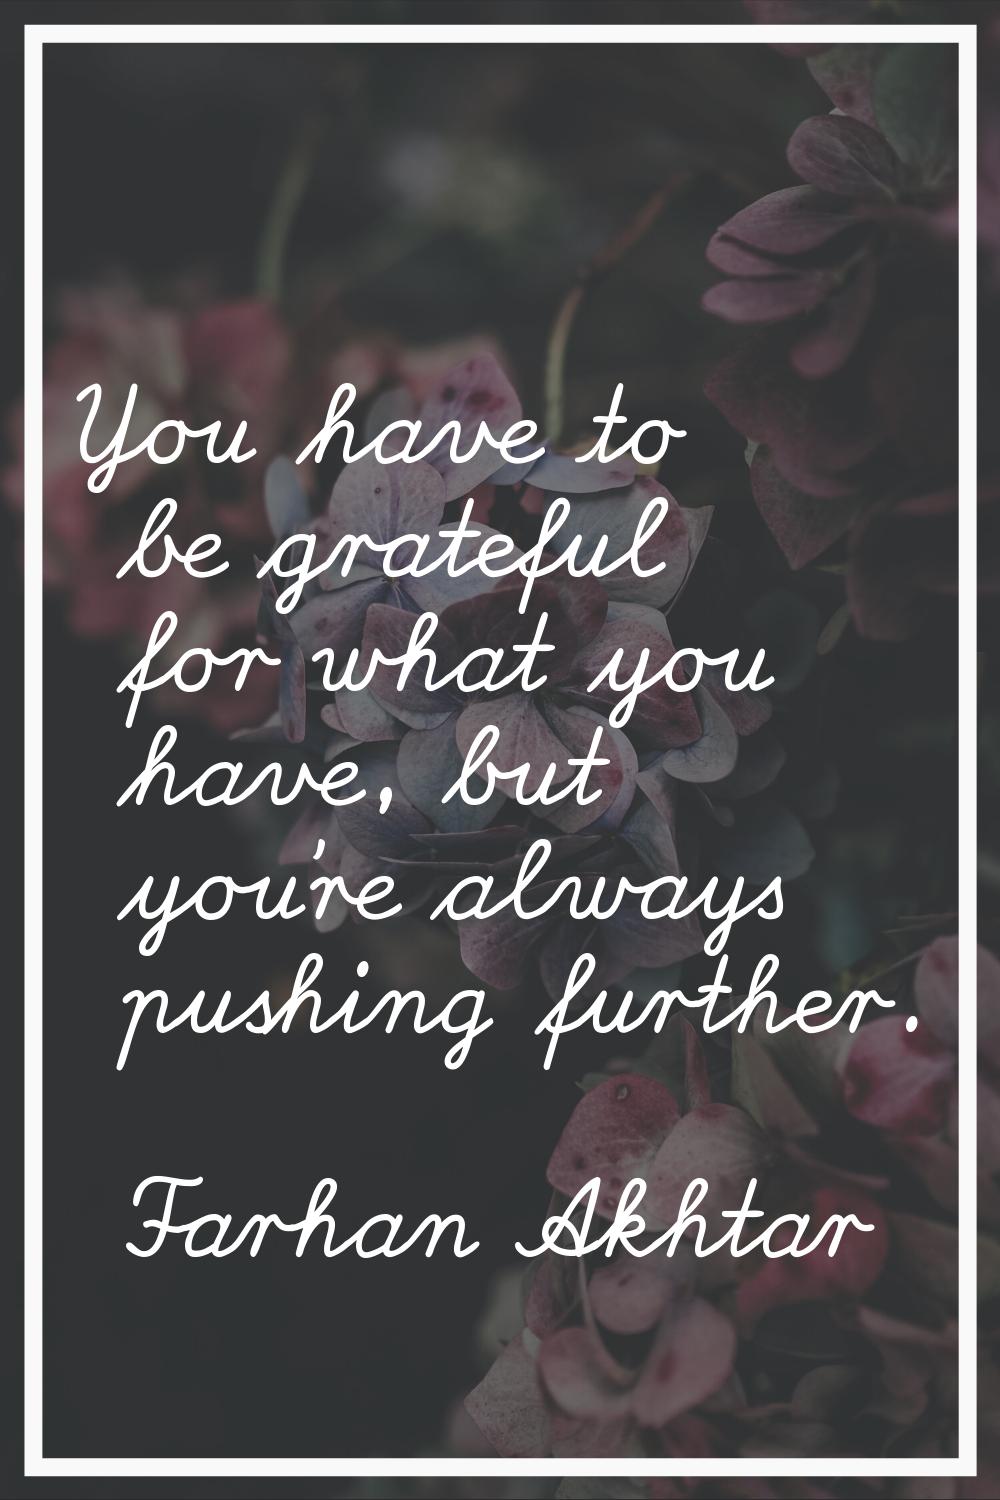 You have to be grateful for what you have, but you're always pushing further.